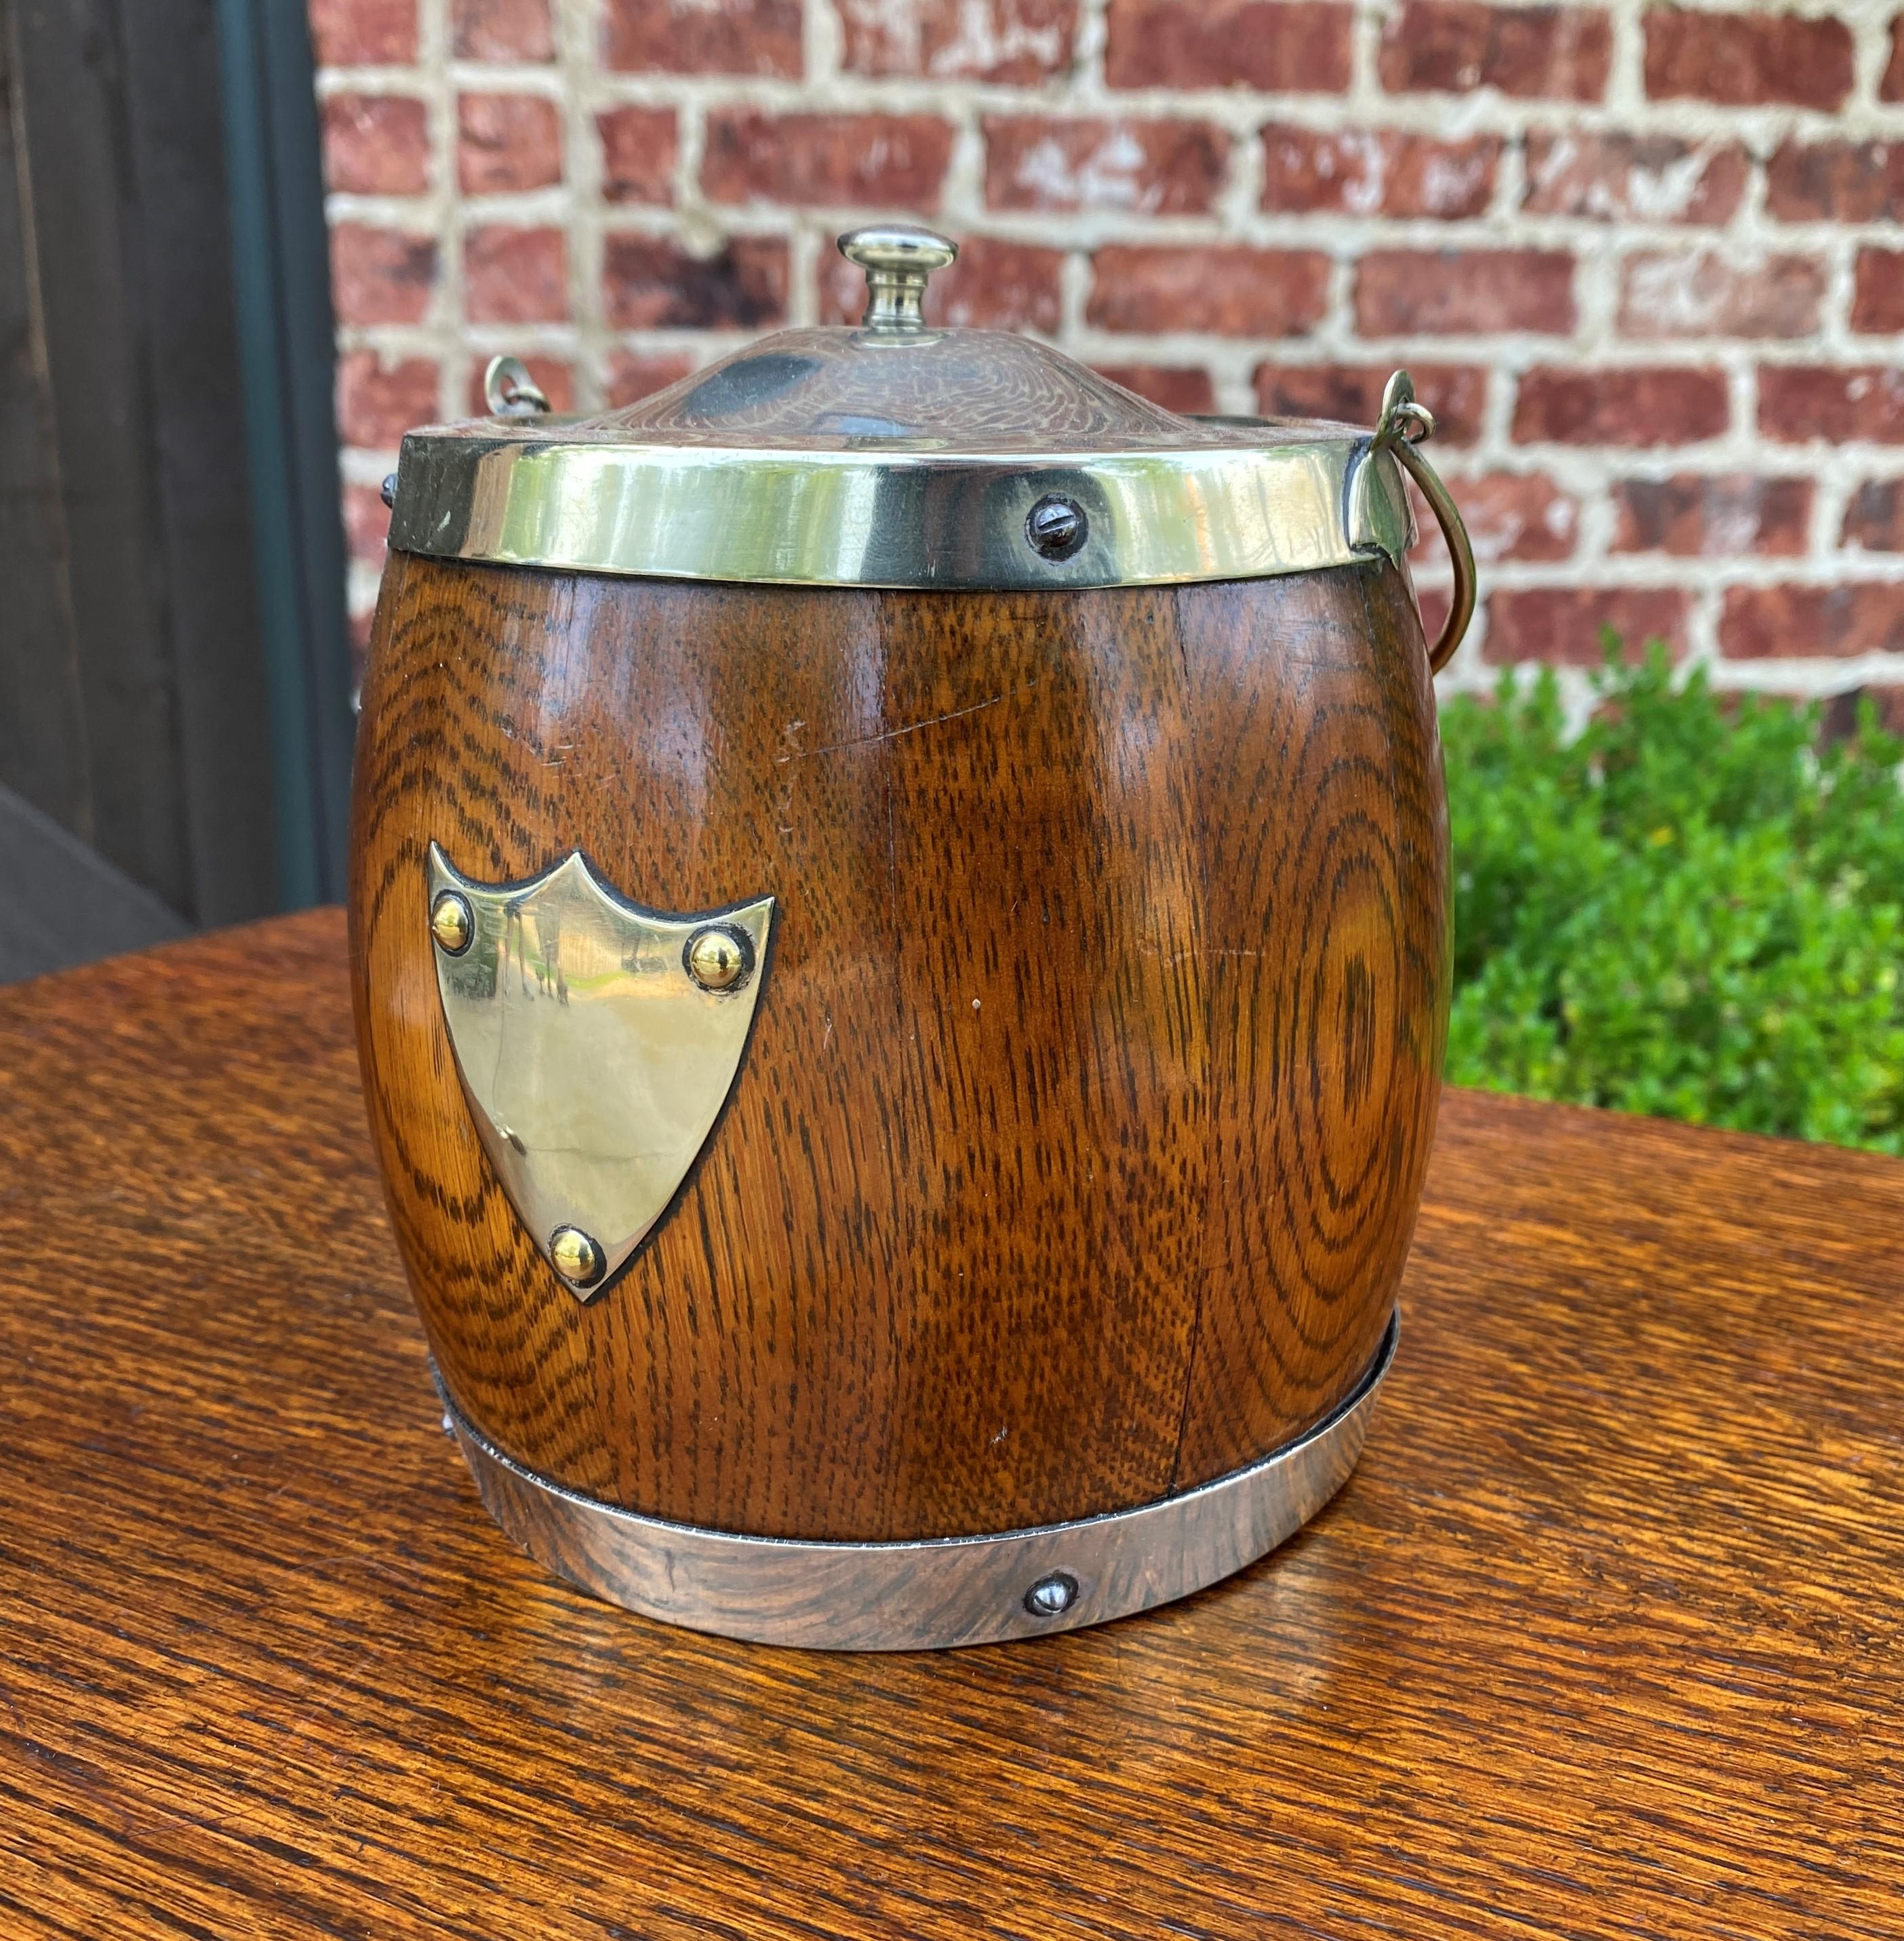 Charming Antique English oak biscuit barrel or tobacco jar with oak lid~~c. 1930s.

 Charming decorative accent piece for any room in today's home or office~~silverplate shield and lid~~interior porcelain lining.

Measures: 9.5